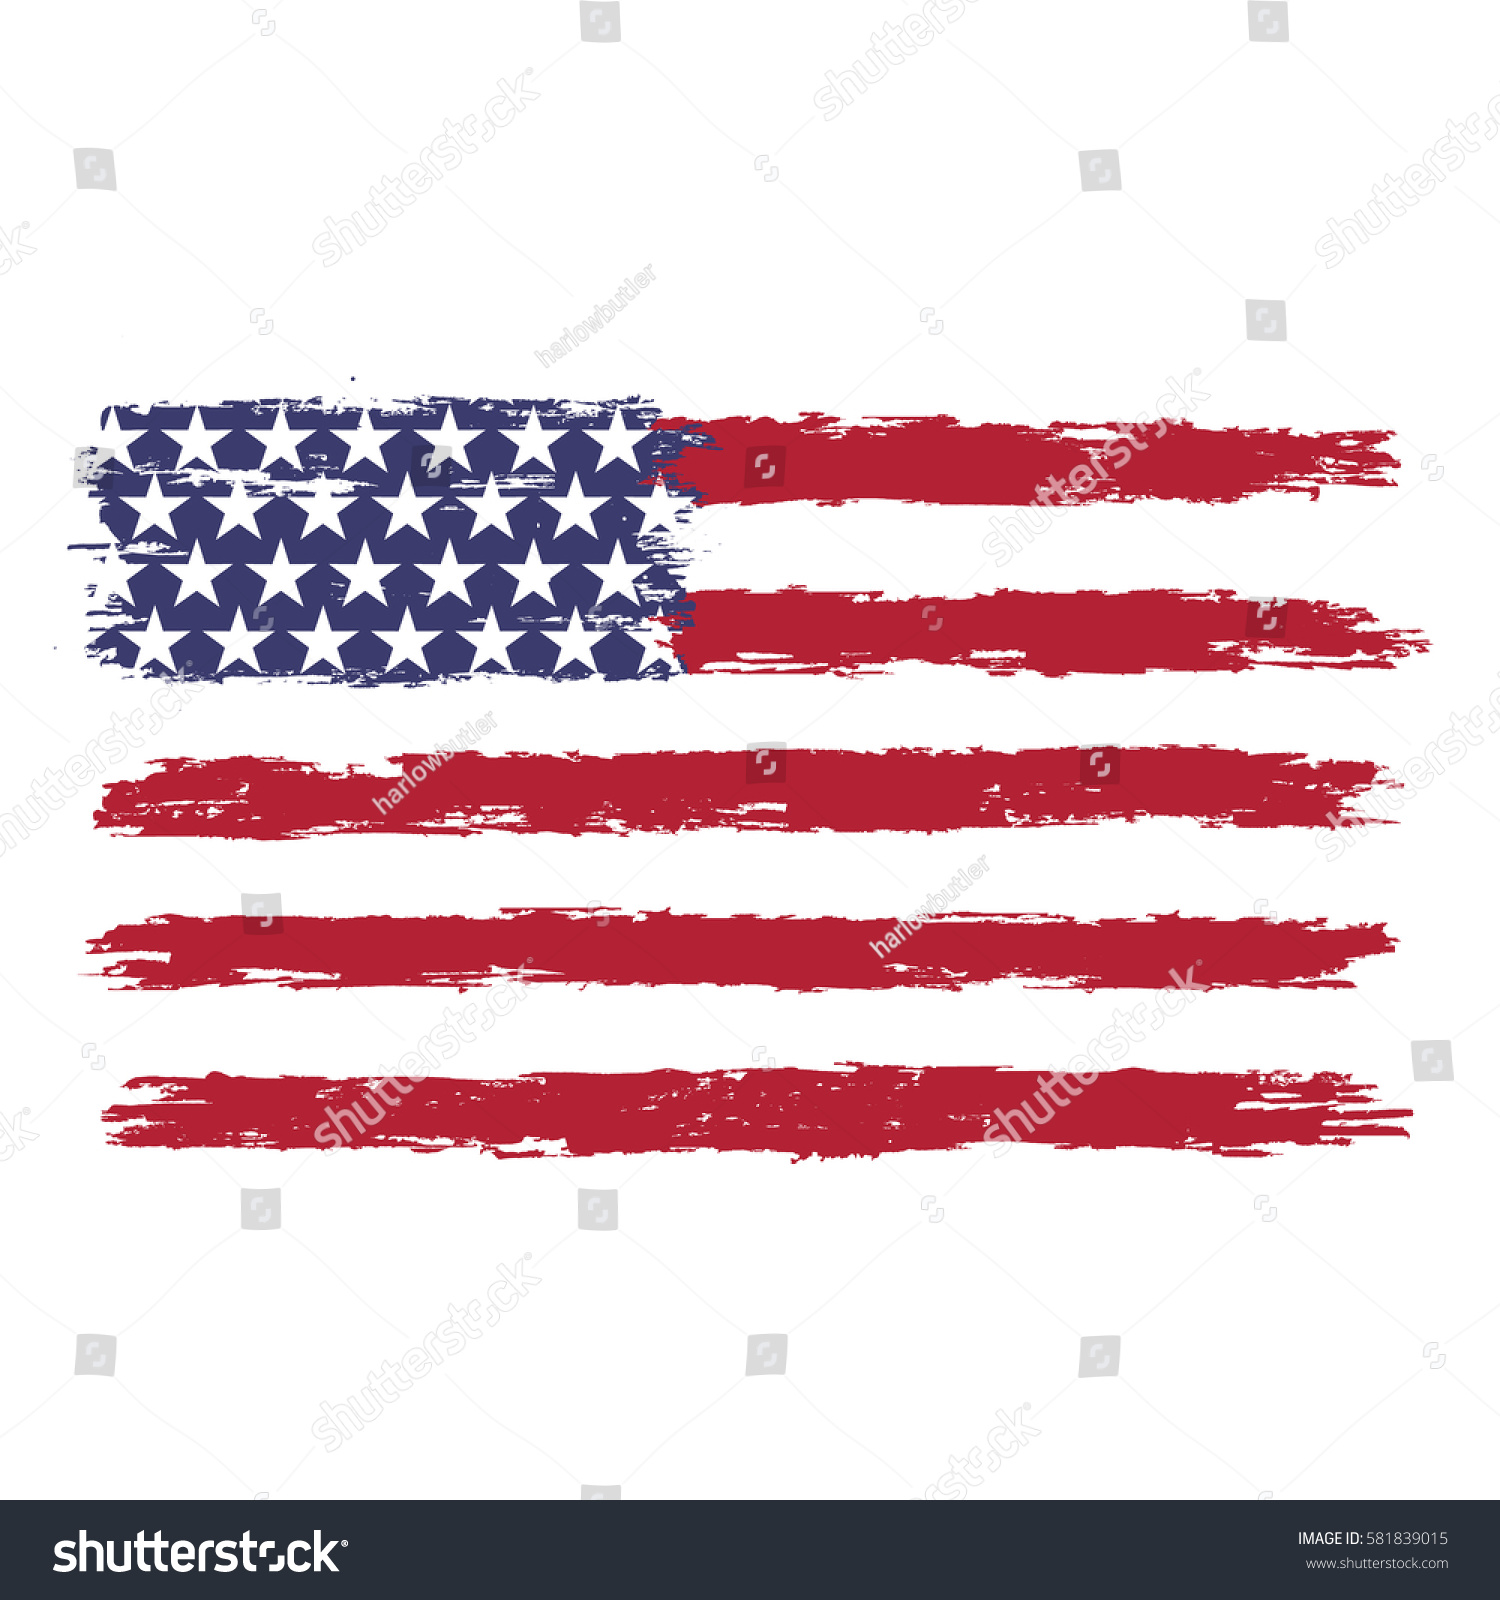 SVG of USA flag in grunge style on a white background svg